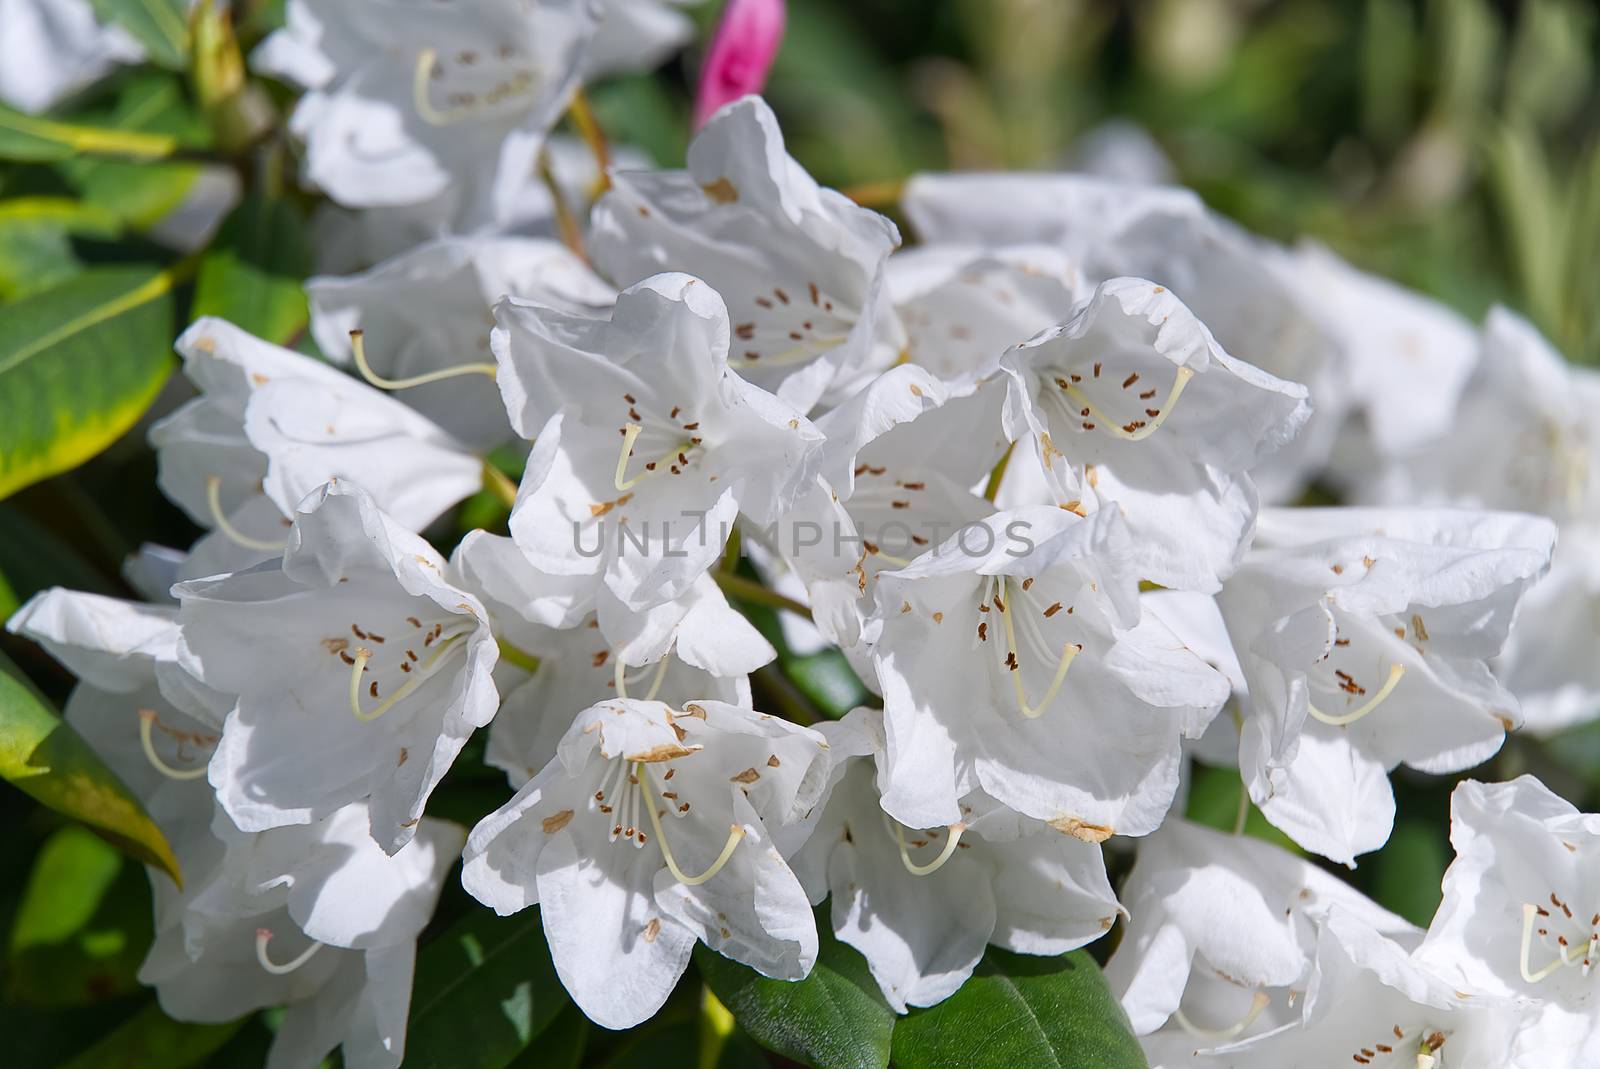 white rhododendrons close-up. Delicate white azalea Rhododendron flowers. Landscape design